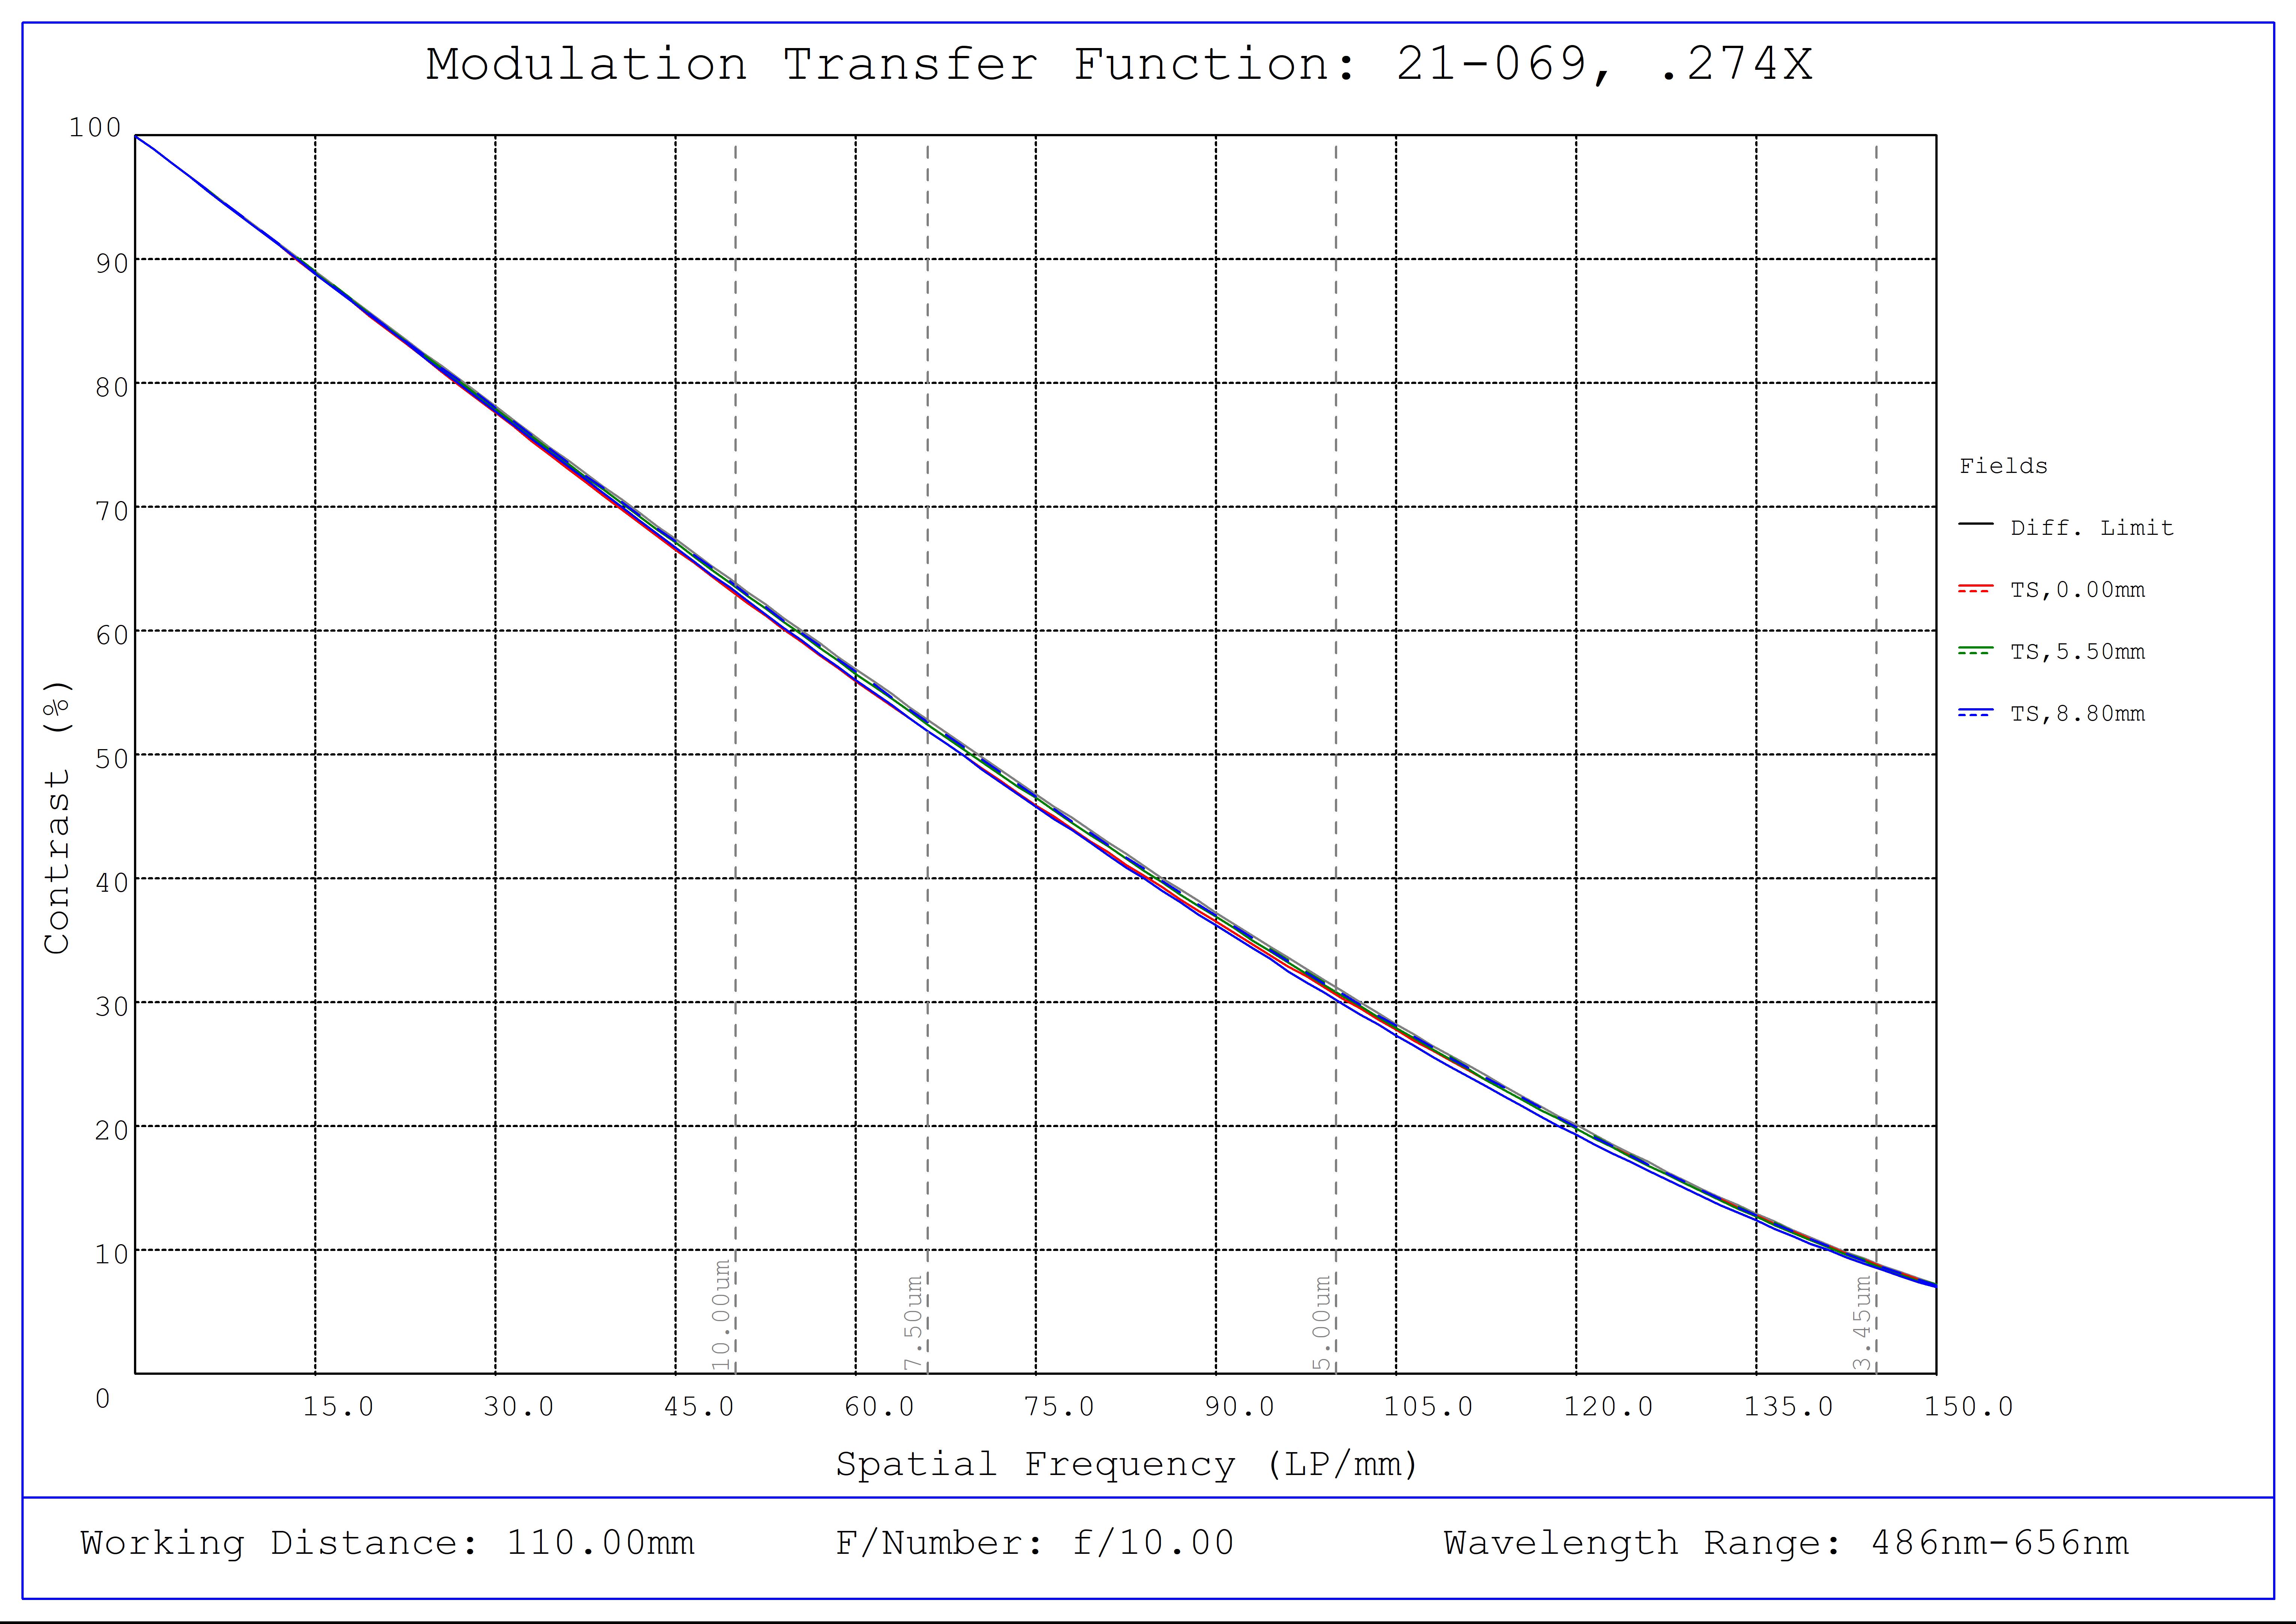 #21-069, 0.274X In-Line CobaltTL Telecentric Lens, Modulated Transfer Function (MTF) Plot, 110mm Working Distance, f10